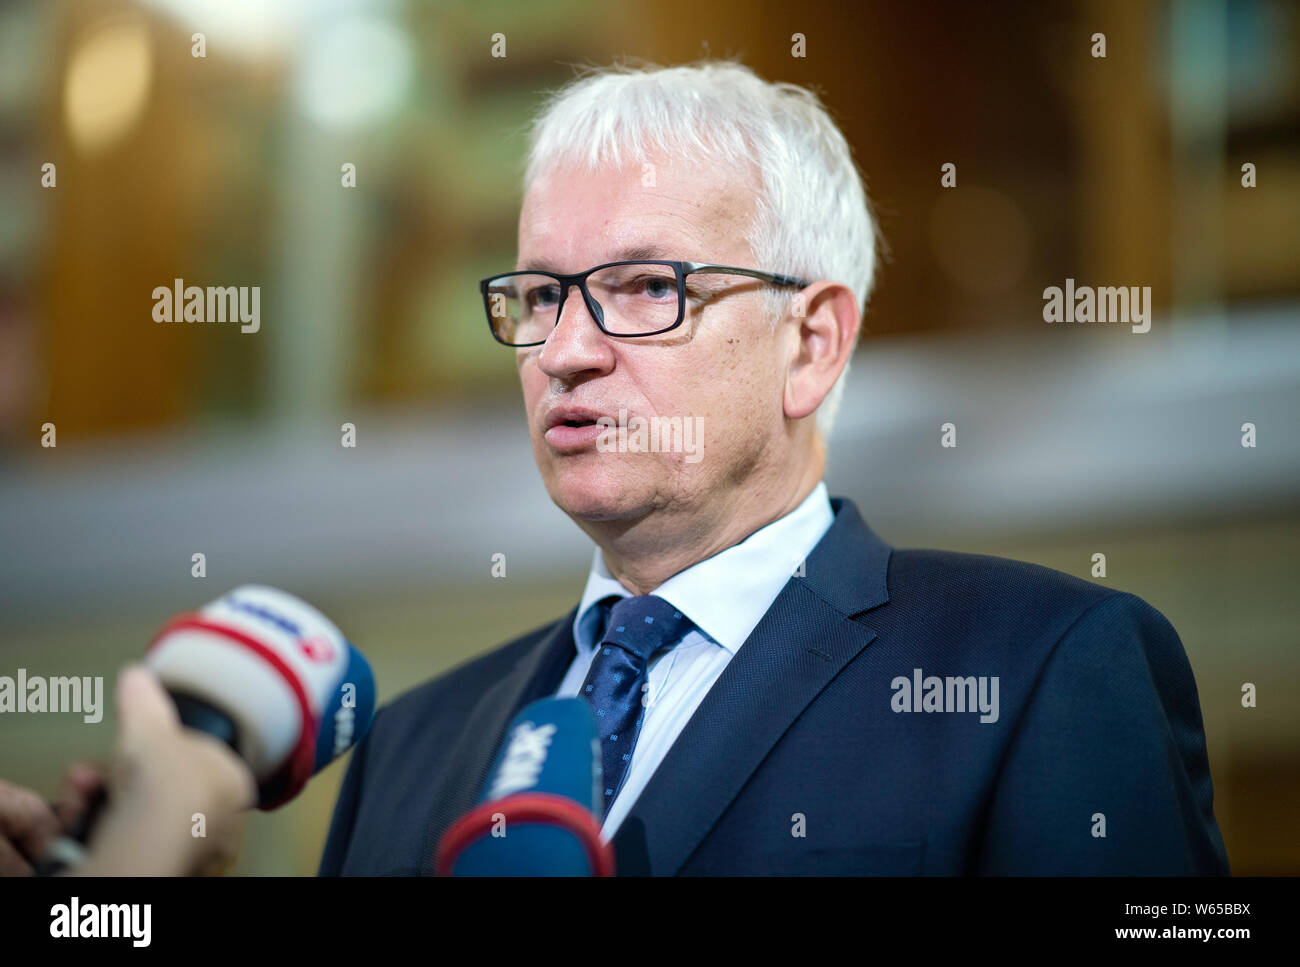 31 July 2019, North Rhine-Westphalia, Münster: Jürgen Resch, Managing Director of Deutsche Umwelthilfe, gives an interview before the hearing. The Higher Administrative Court of North Rhine-Westphalia is hearing the action brought by Deutsche Umwelthilfe (German Environmental Aid) against the city of Aachen for the continuation of the Cologne district government's air pollution control plans. The aim is to take measures to ensure that the limit values for nitrogen dioxide are complied with as quickly as possible. Photo: Guido Kirchner/dpa Stock Photo